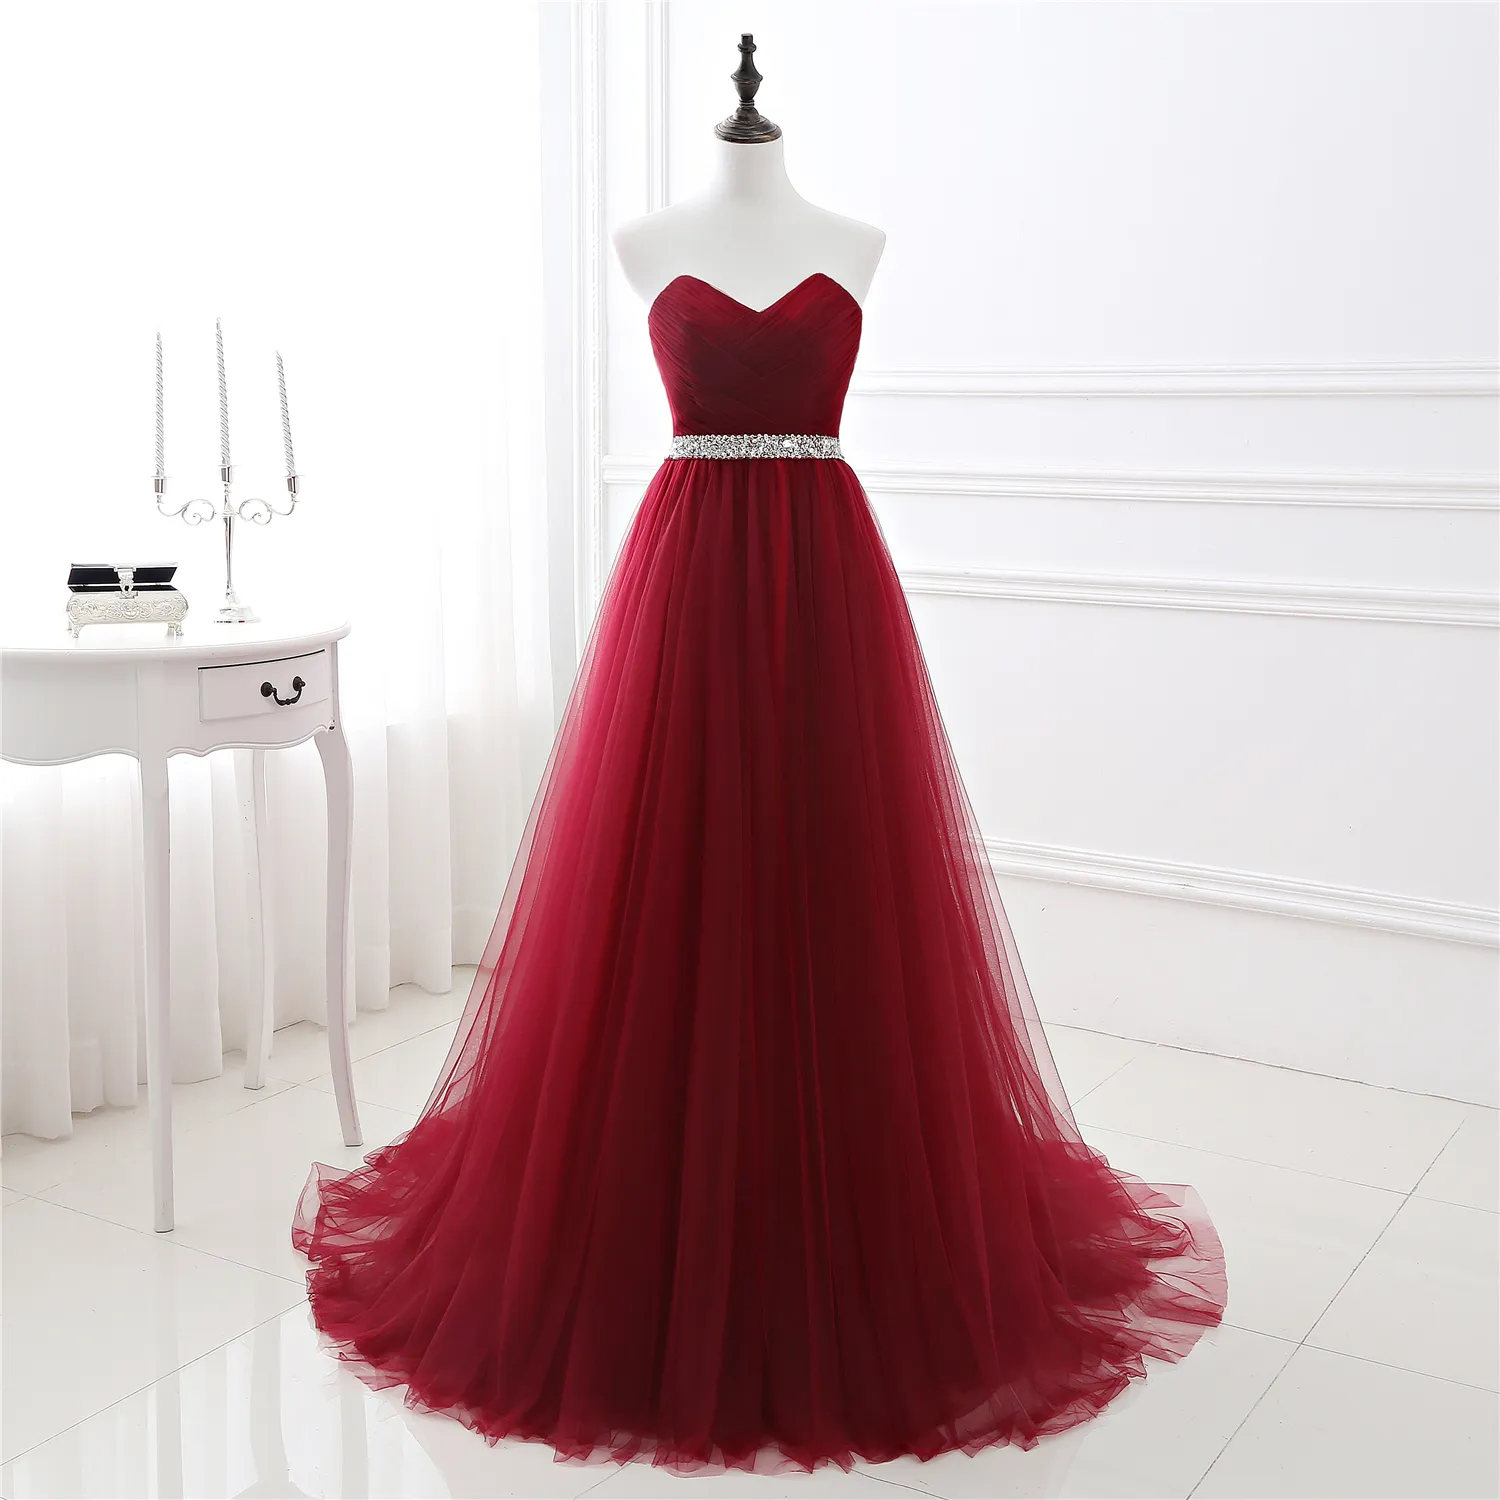 Claret Evening Dresses Long Bridal Prom Gowns Aweetheart Sash in the Wate Lace-up